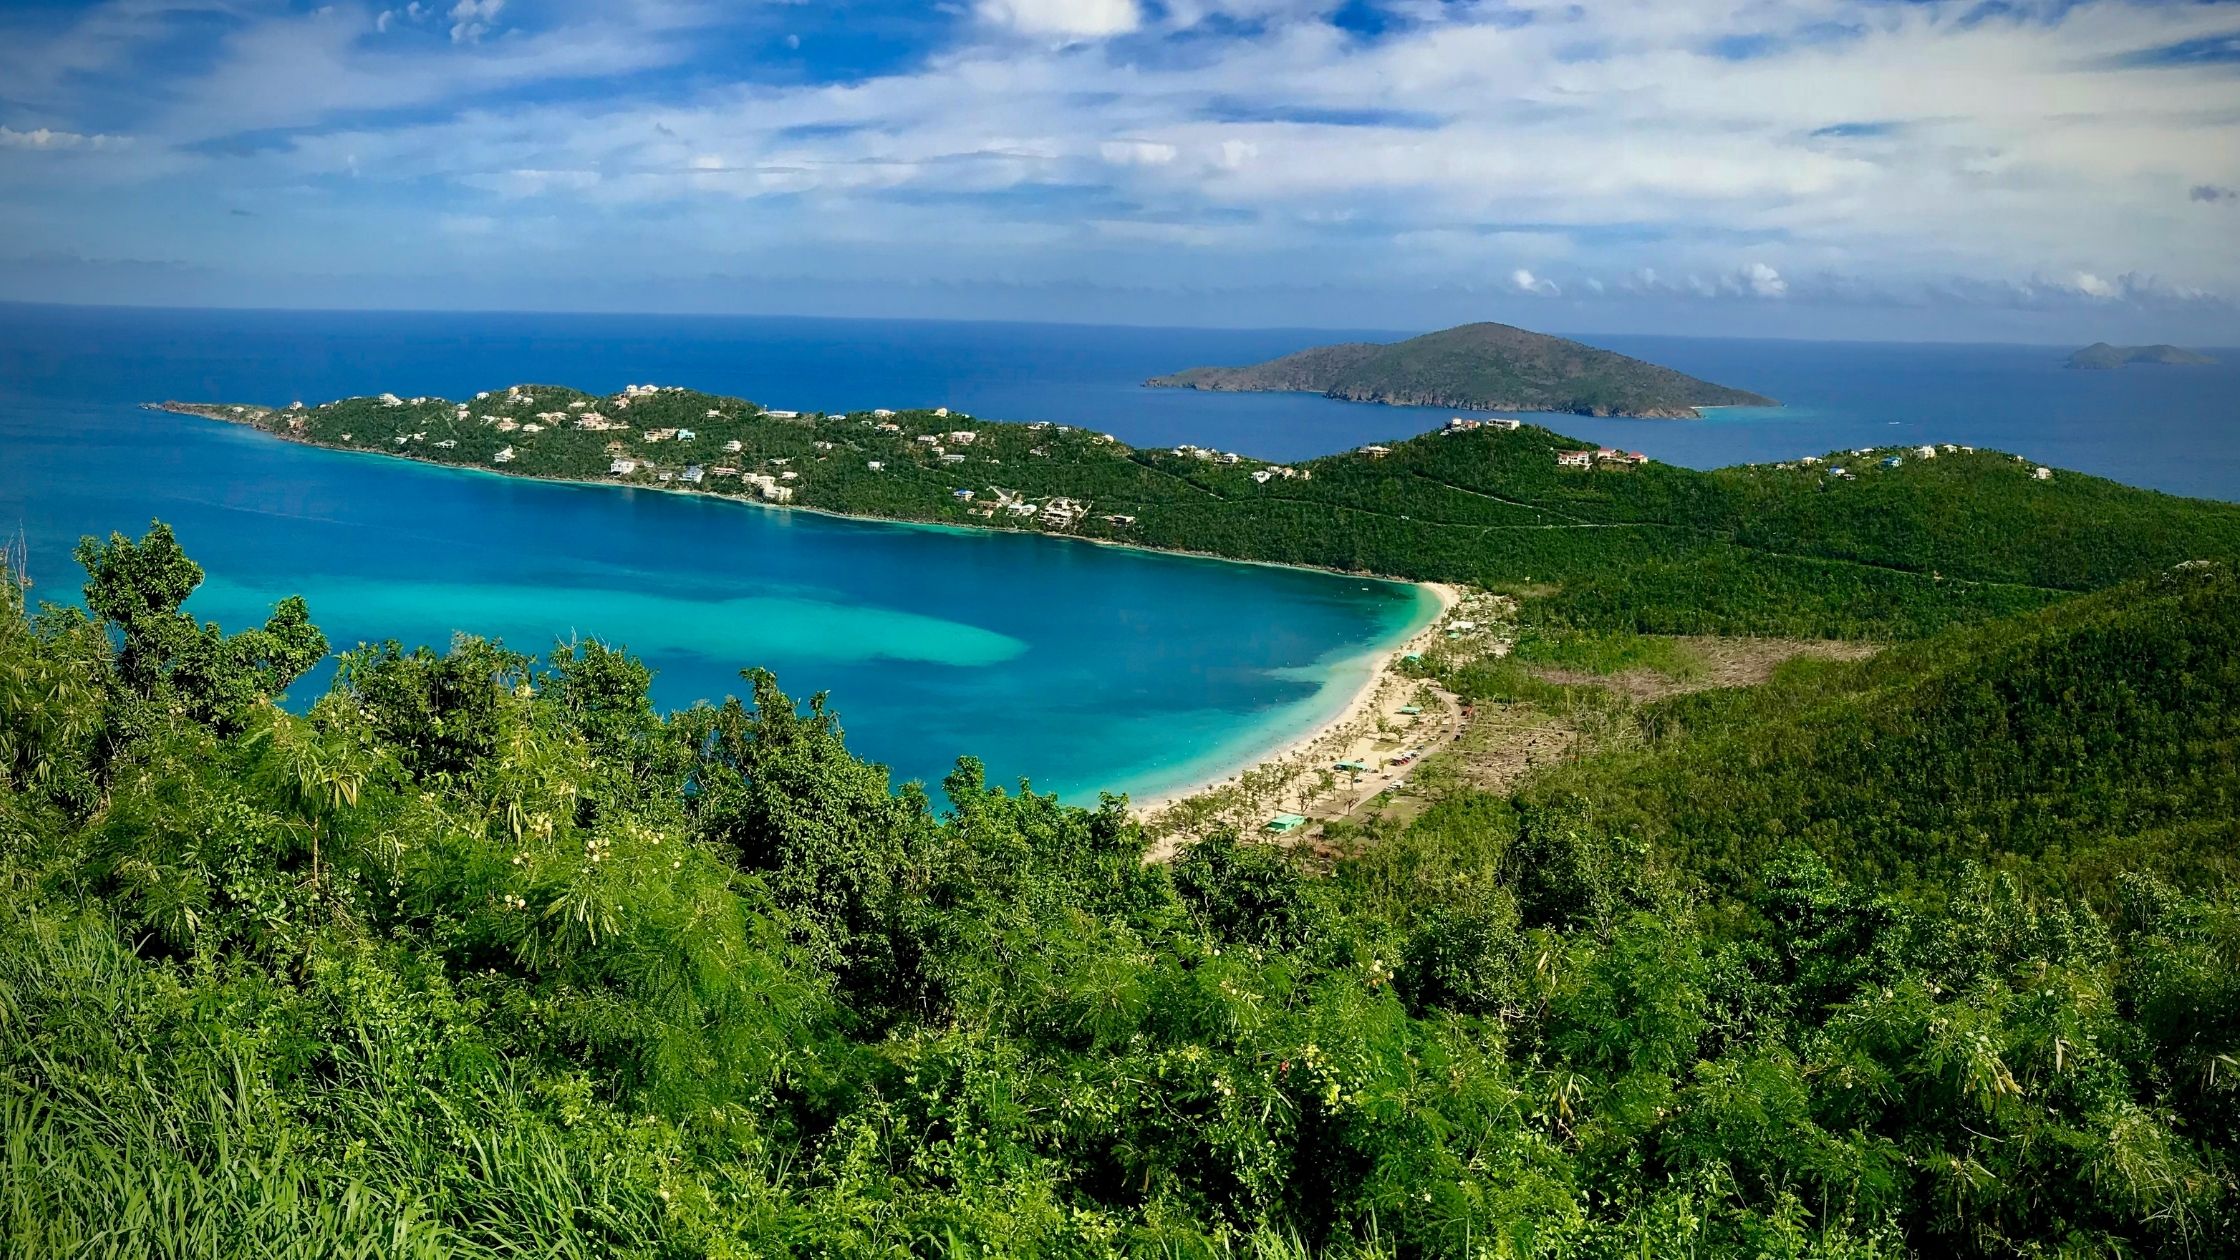 Do you need a passport to go to the Virgin Islands?